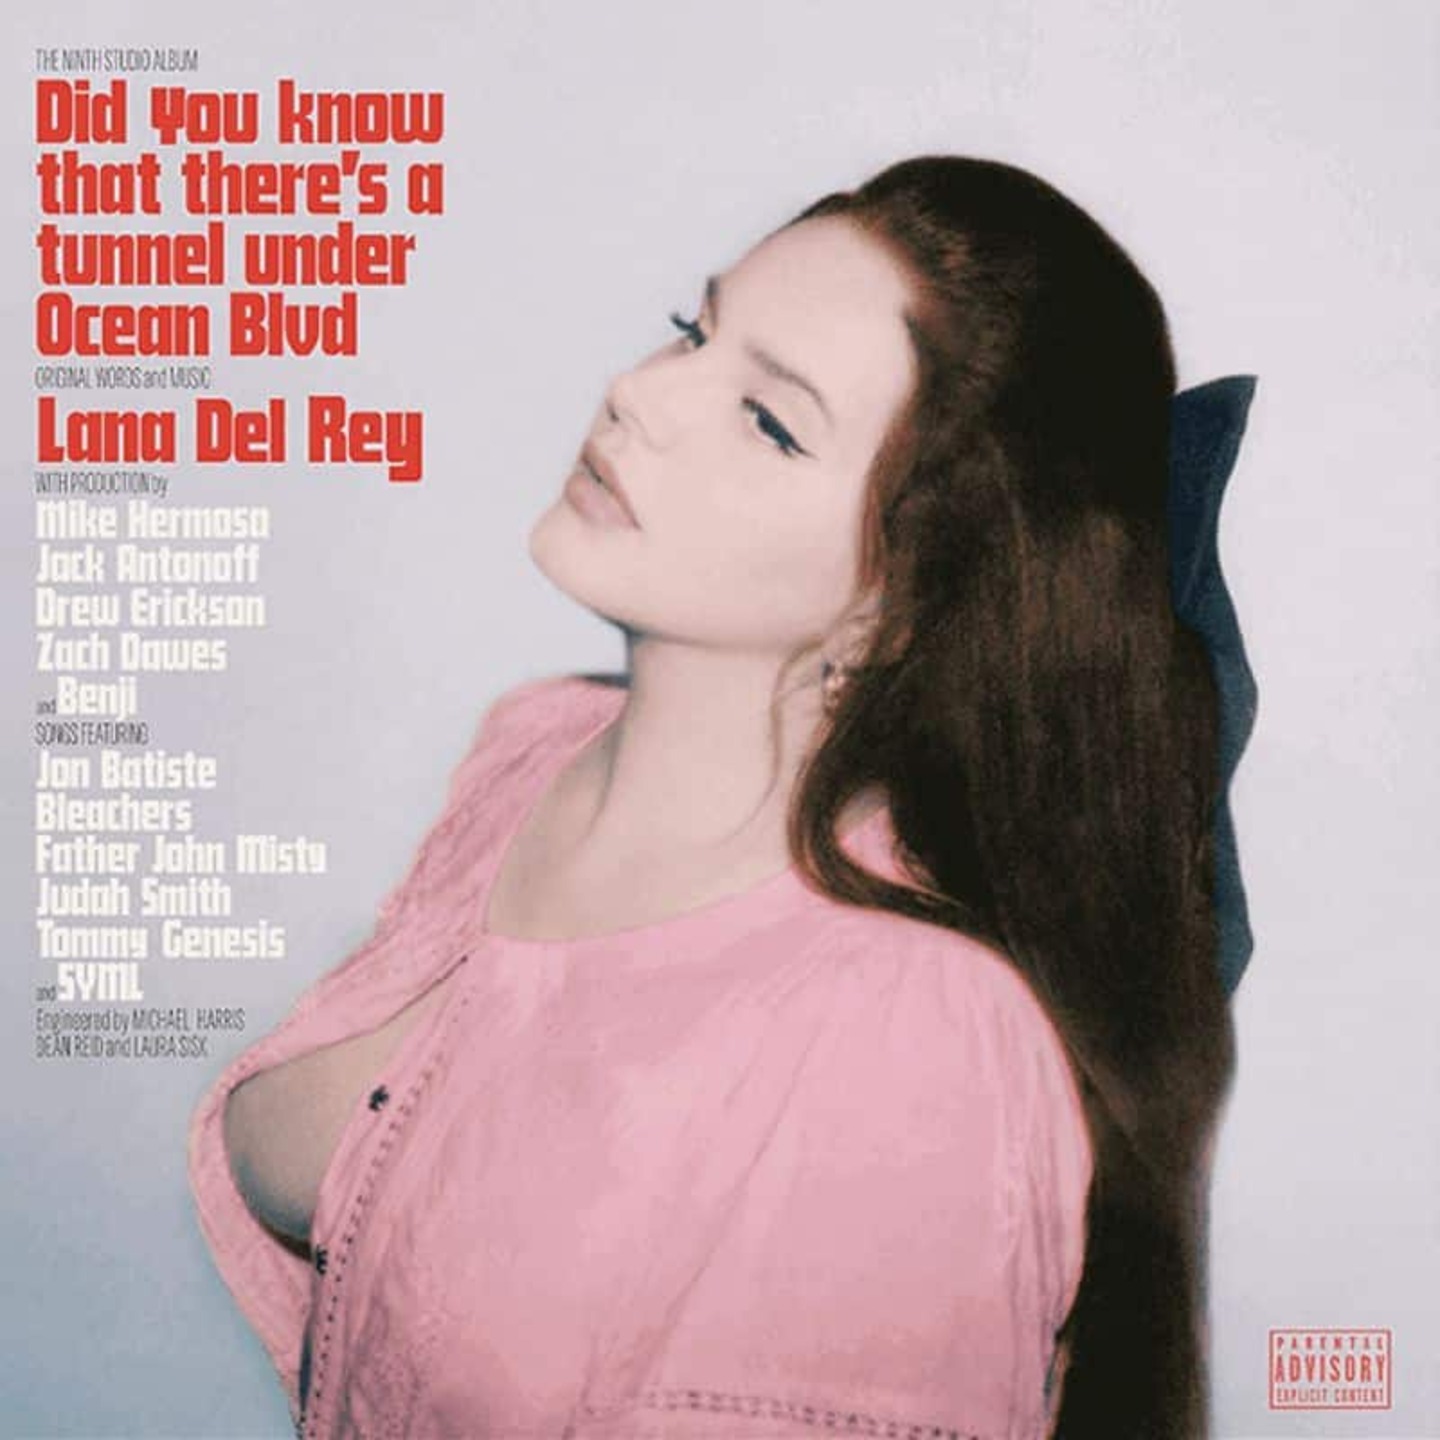 LANA DEL REY - Did You Know That There's A Tunnel Under Ocean Blvd 2xLP (Light Green vinyl w/ Alternate Cover)